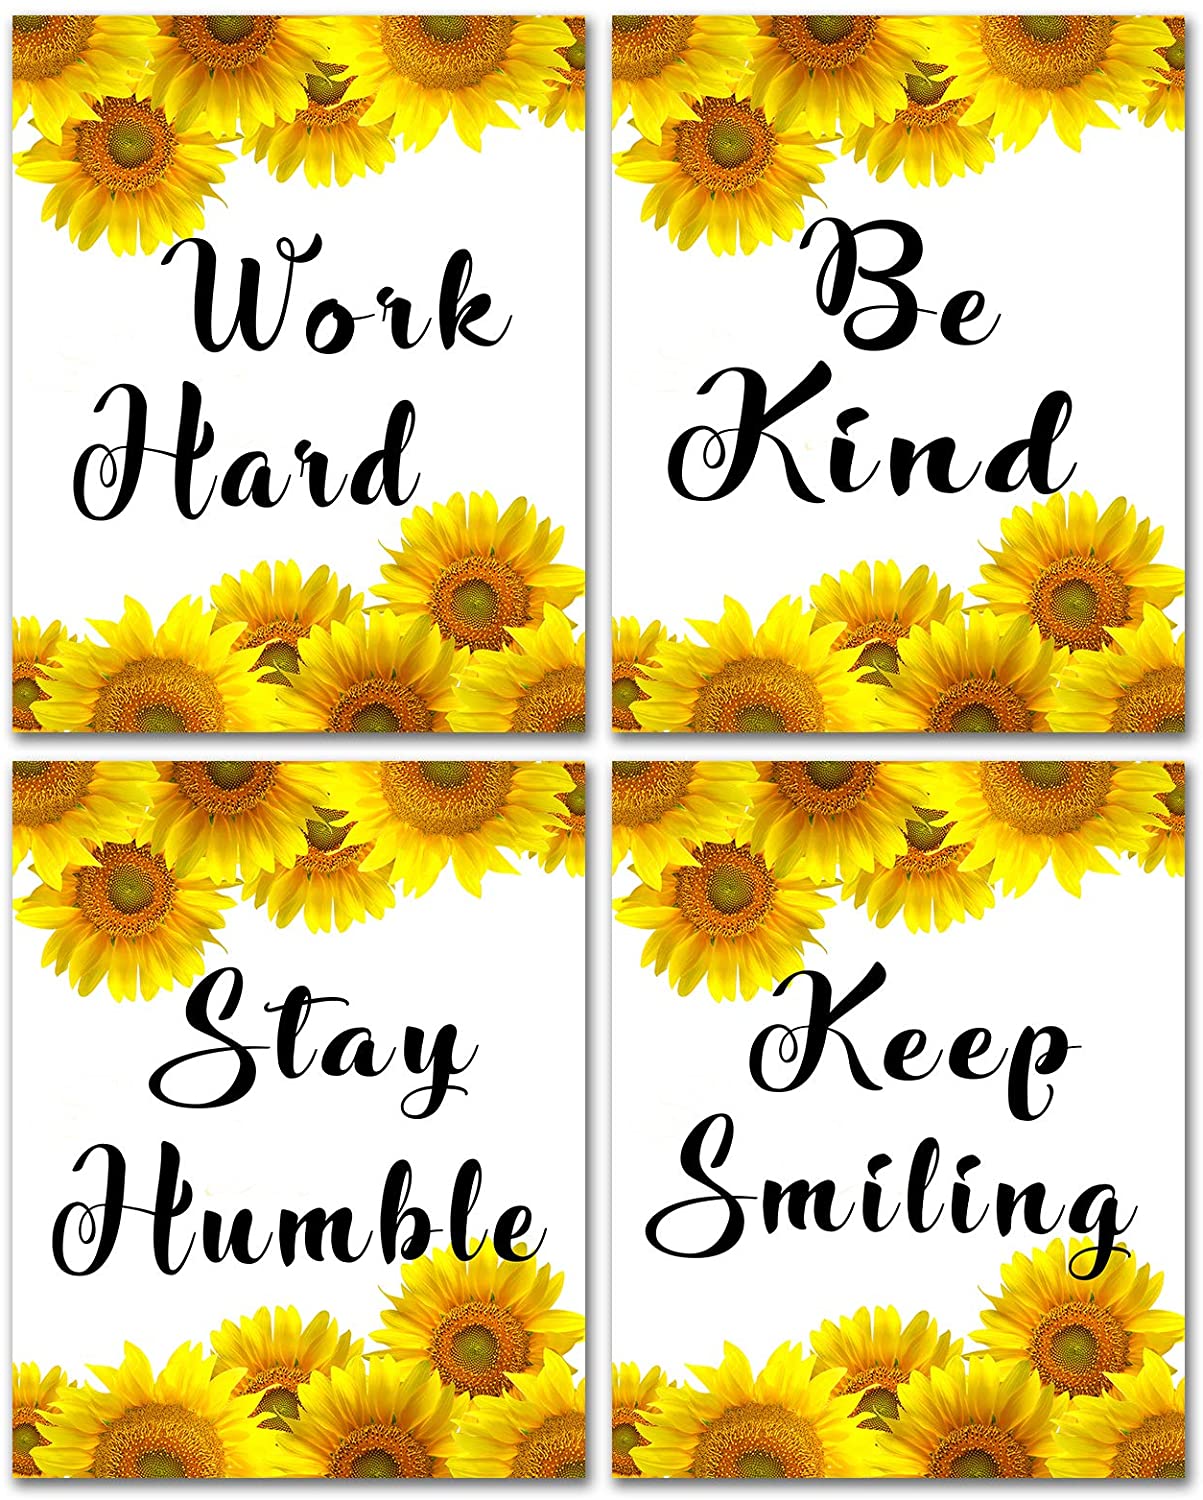 Inspirational Quotes Posters Wall Art Canvas Sayings Painting Classroom Nursery Decorations for Kids Girls Motivational Decor Modern Home Office Artwork Unframed Canvas Painting 8x10inches: Posters & Prints